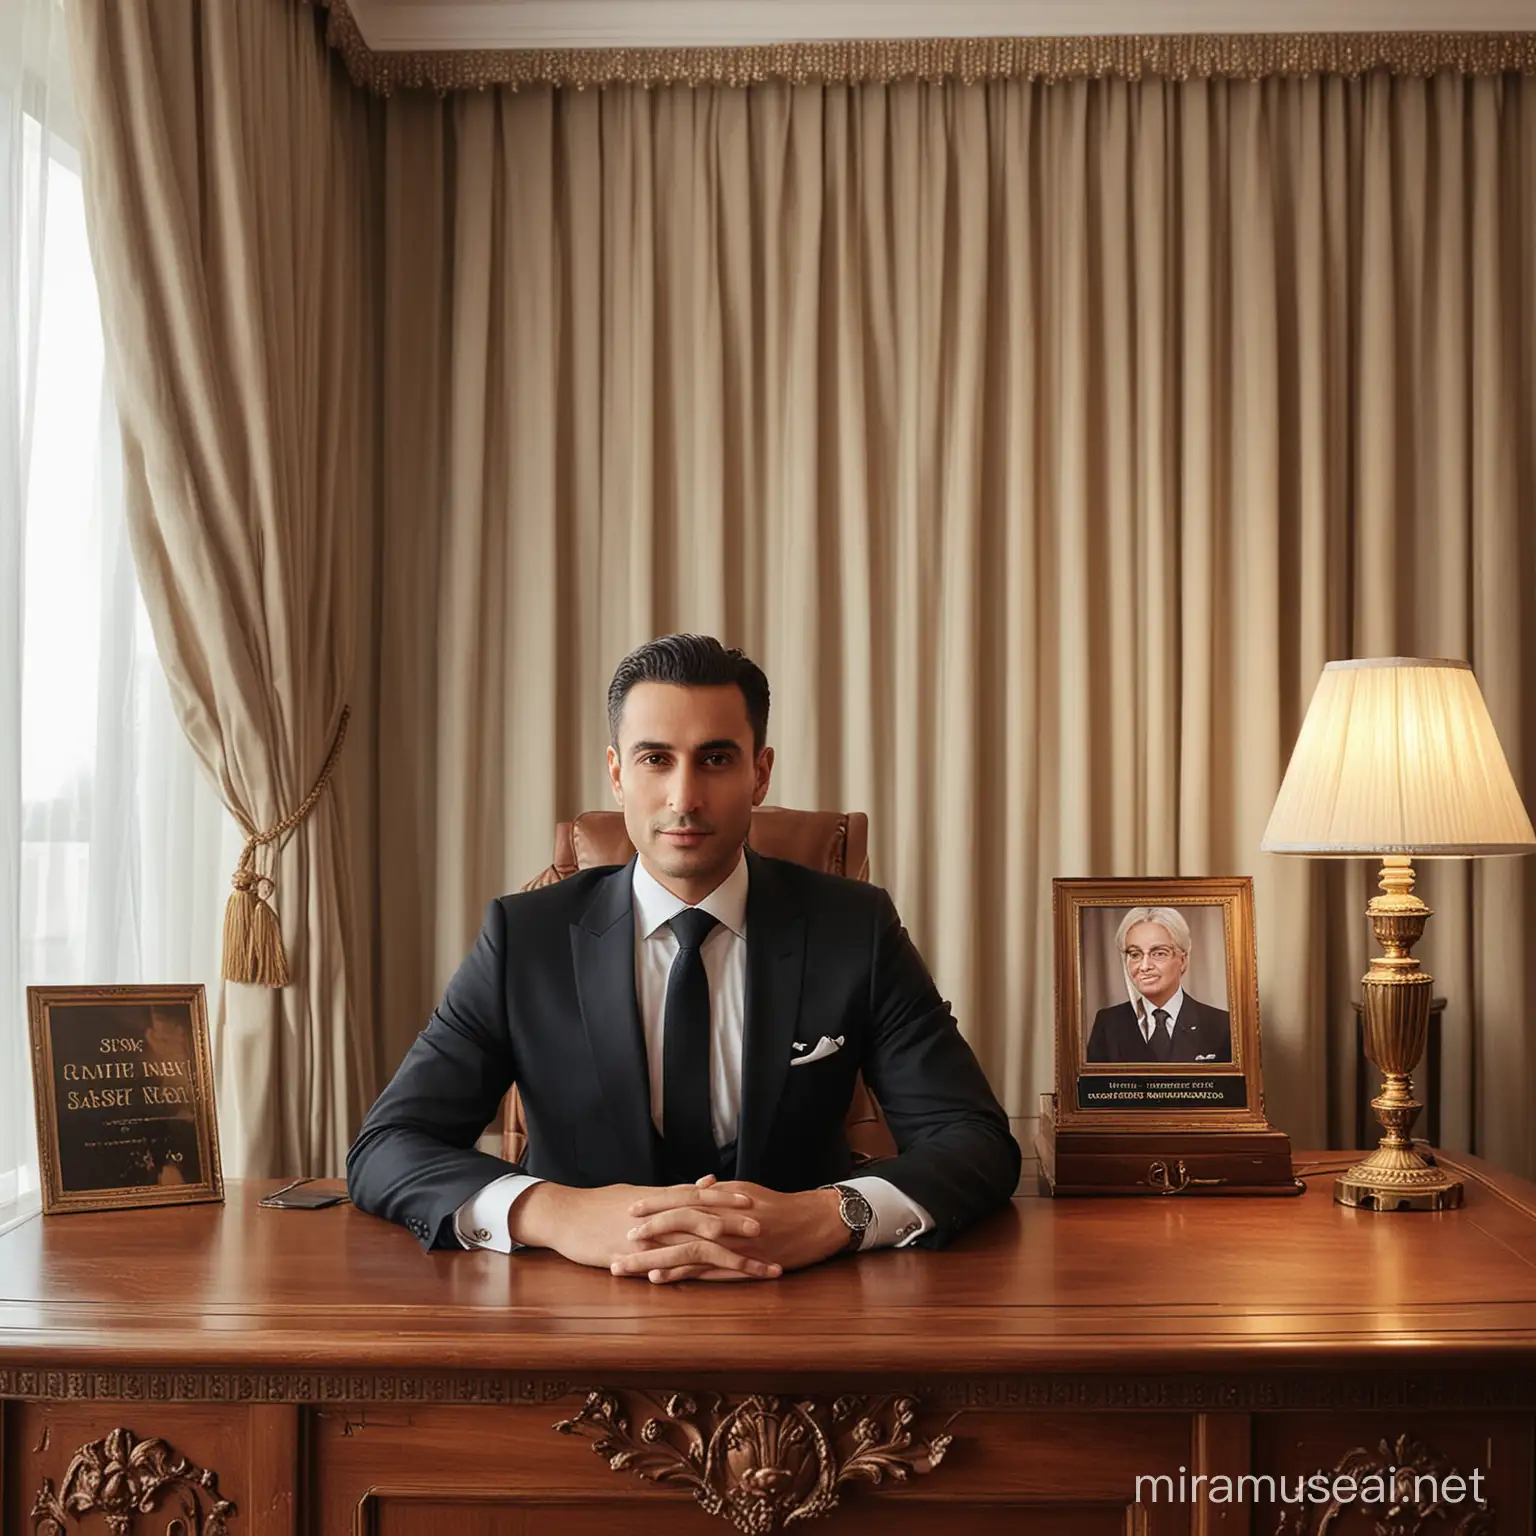 A picture design of me sitting behind a very luxurious wooden desk, wearing a classic formal suit, and behind me a very luxurious curtain. There is a sign on the desk with the name “BASSEM ONSY” on it, and there is also a chic and luxurious lampshade on the desk.